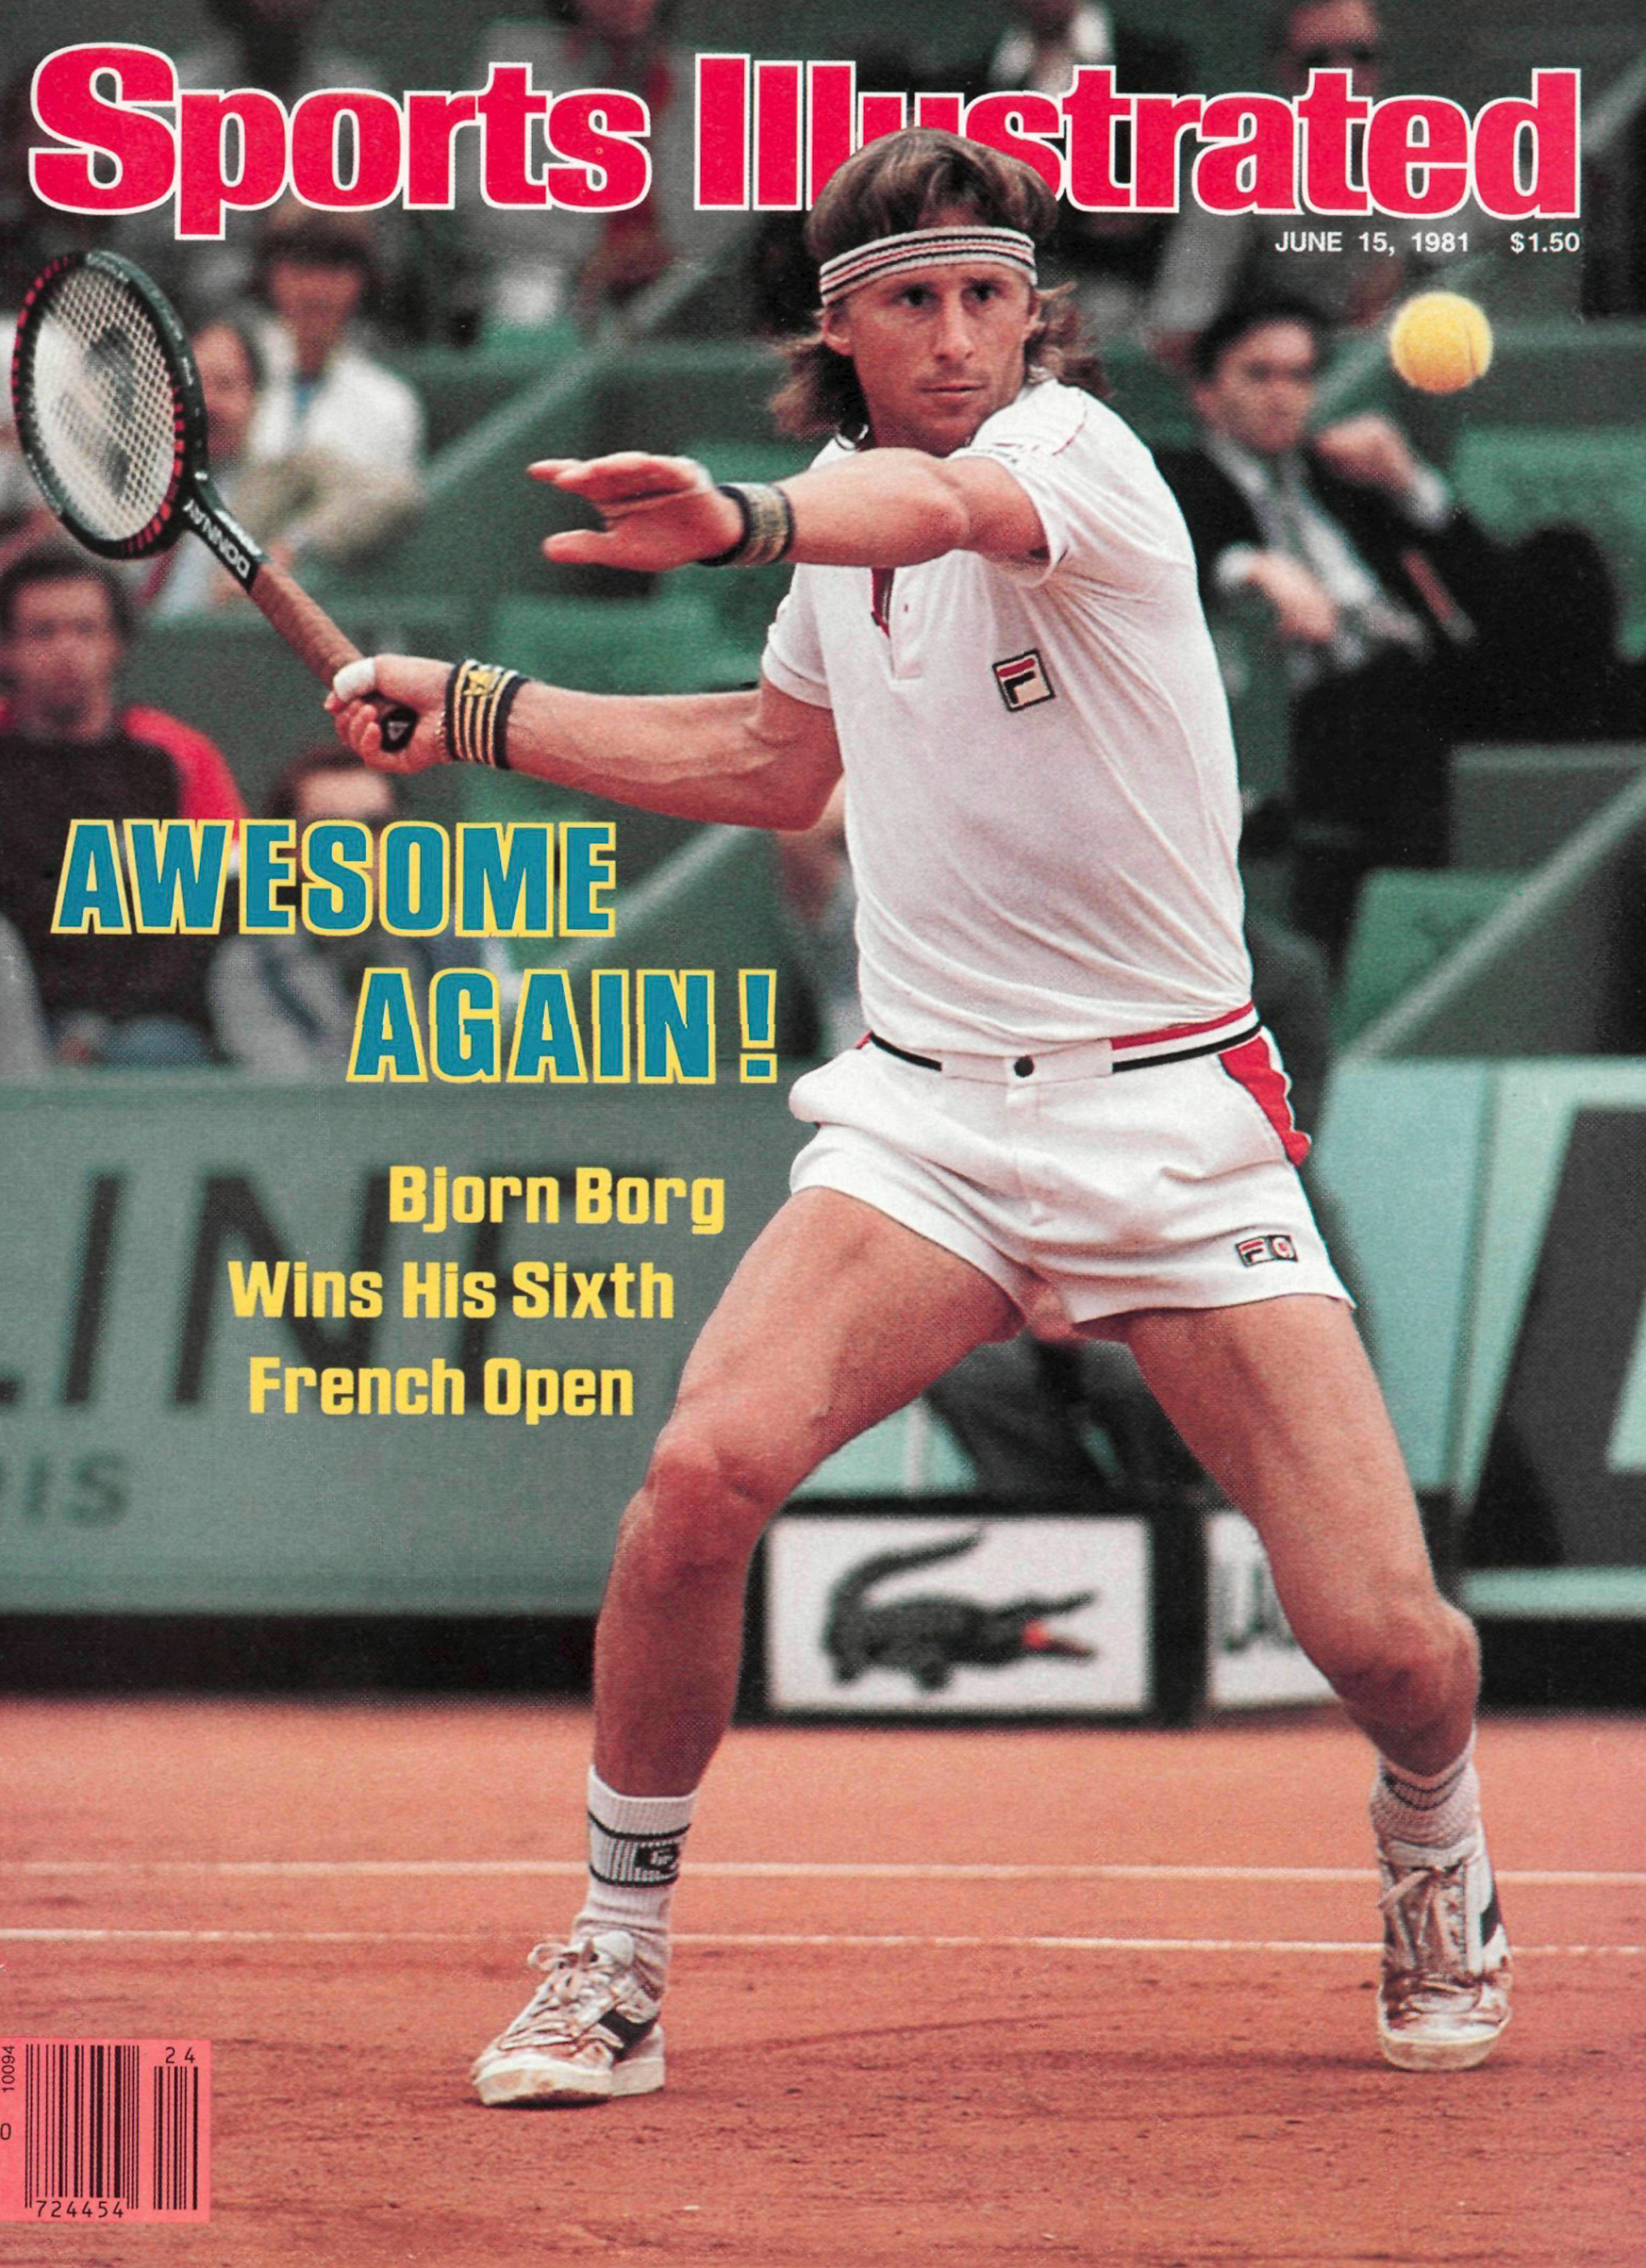 June 15, 1981 Sports Illustrated Cover. Sweden Bjorn Borg in action during match at Stade Roland Garros. Paris, France. Photo by Russ Adams. (Russ Adams—Sports Illustrated)